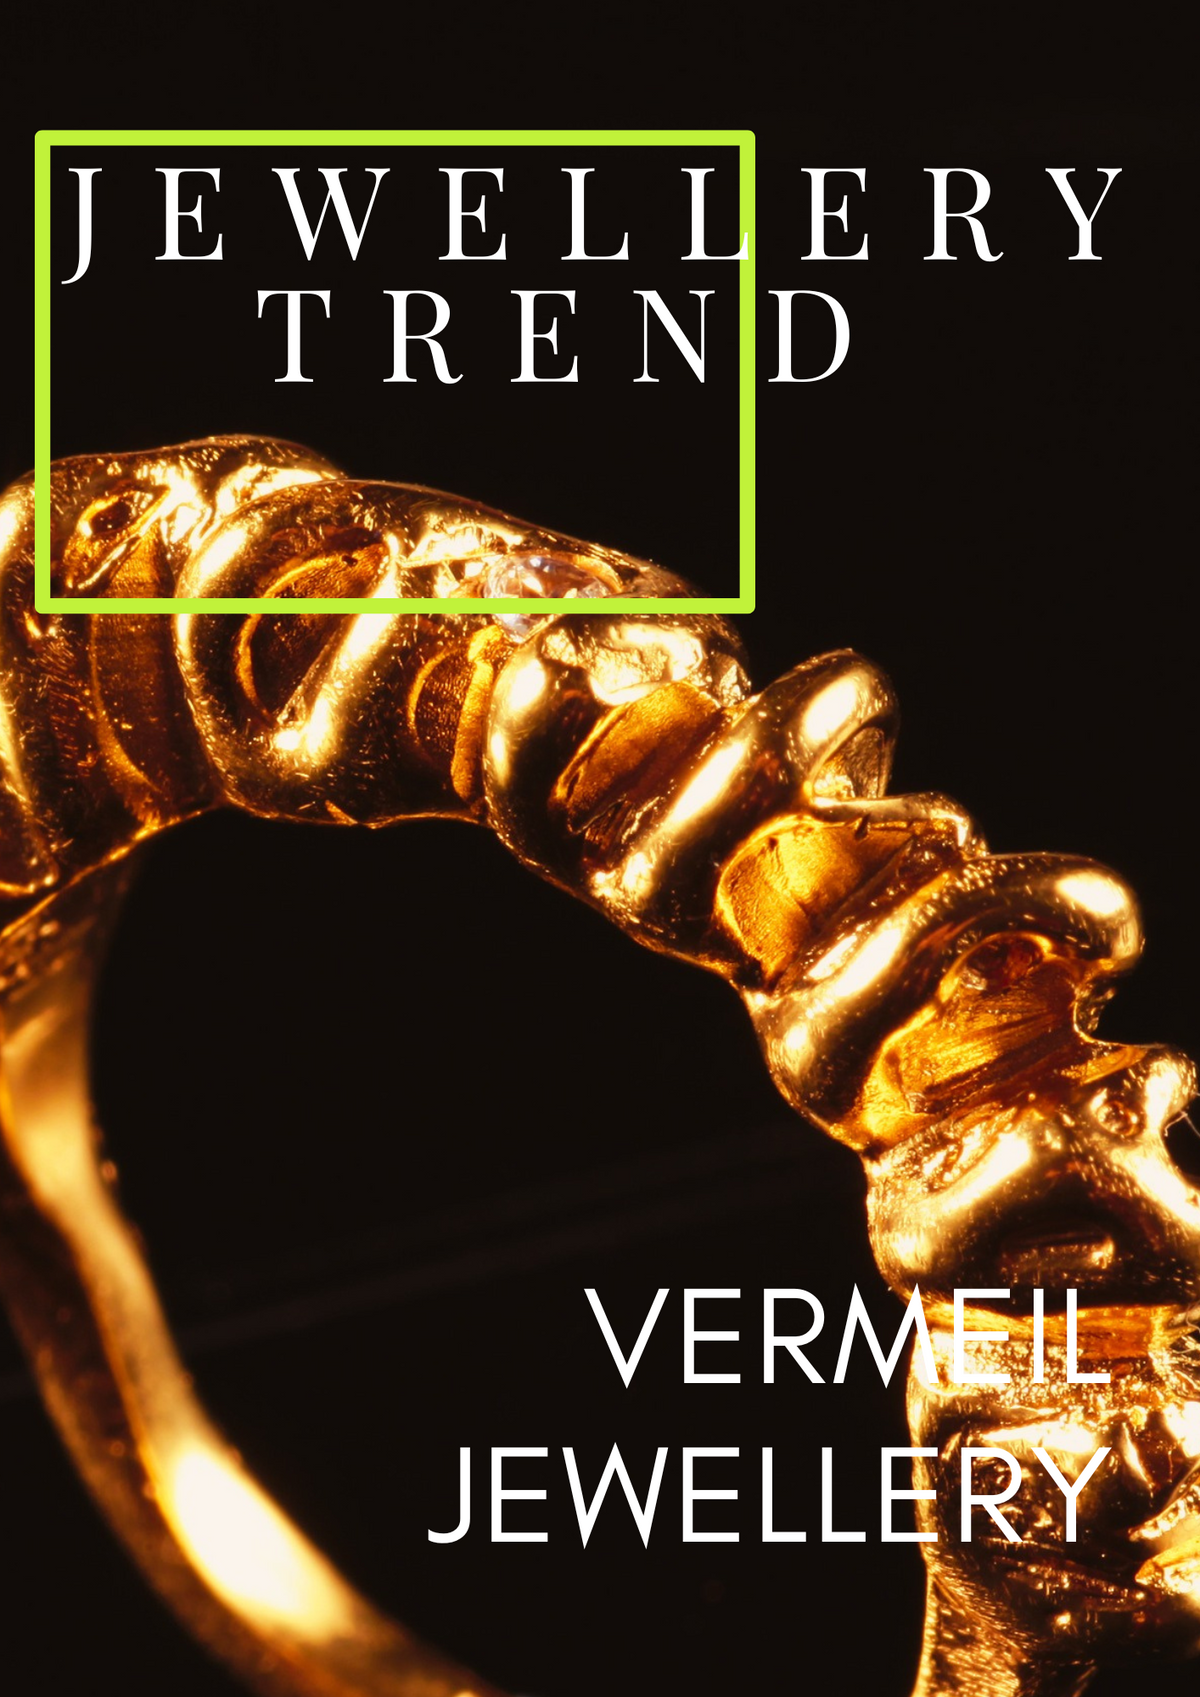 Jewellery Trend Vermeil Jewellery The Perfect Balance Of Luxury and Affordability